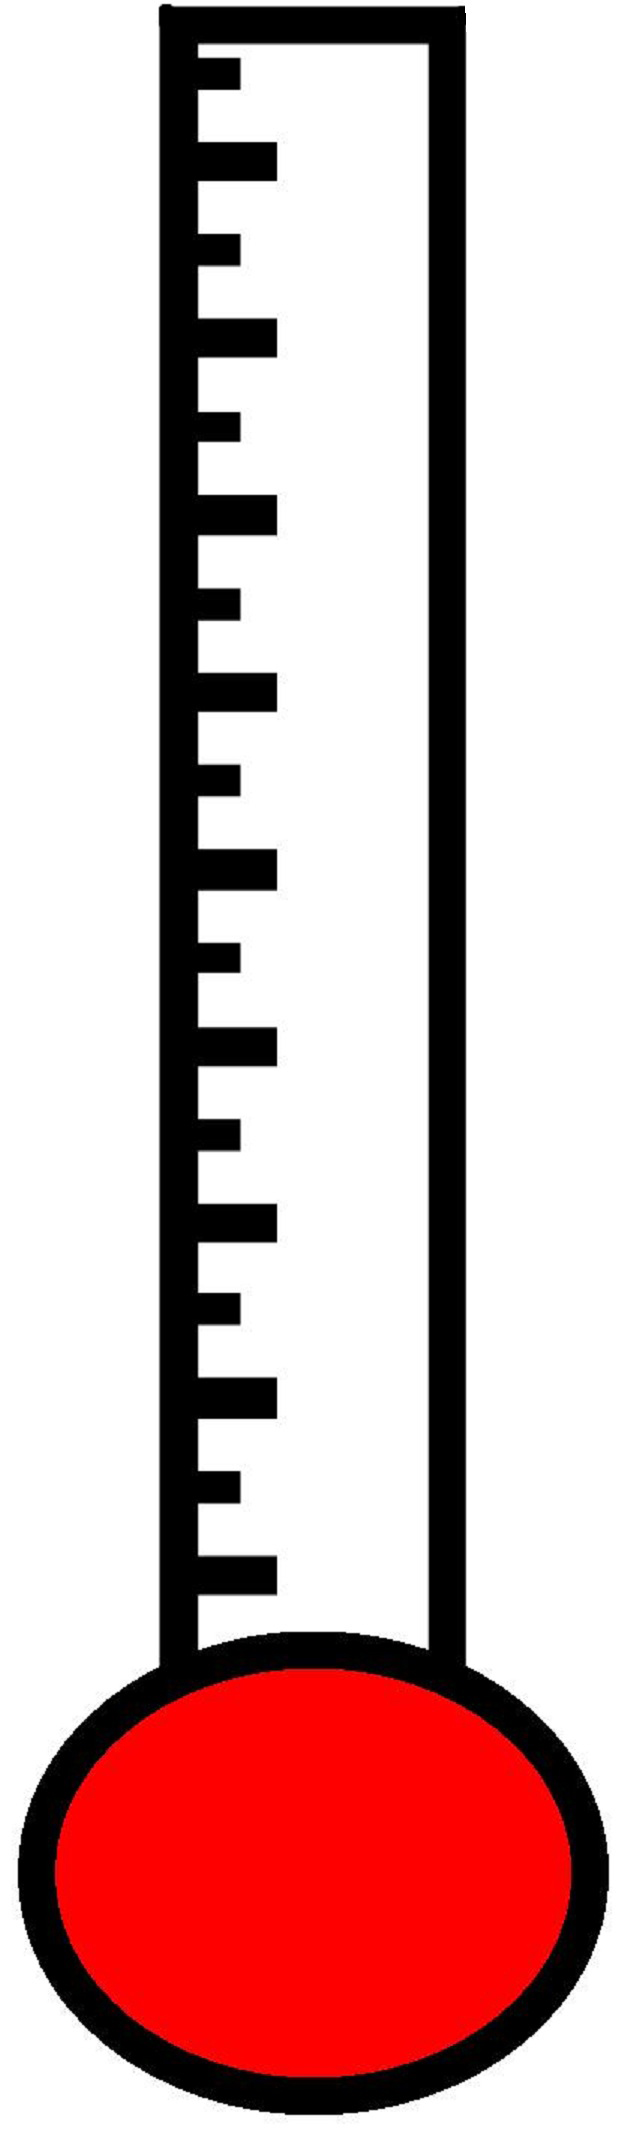 Images For > Fundraising Thermometer Template Excel